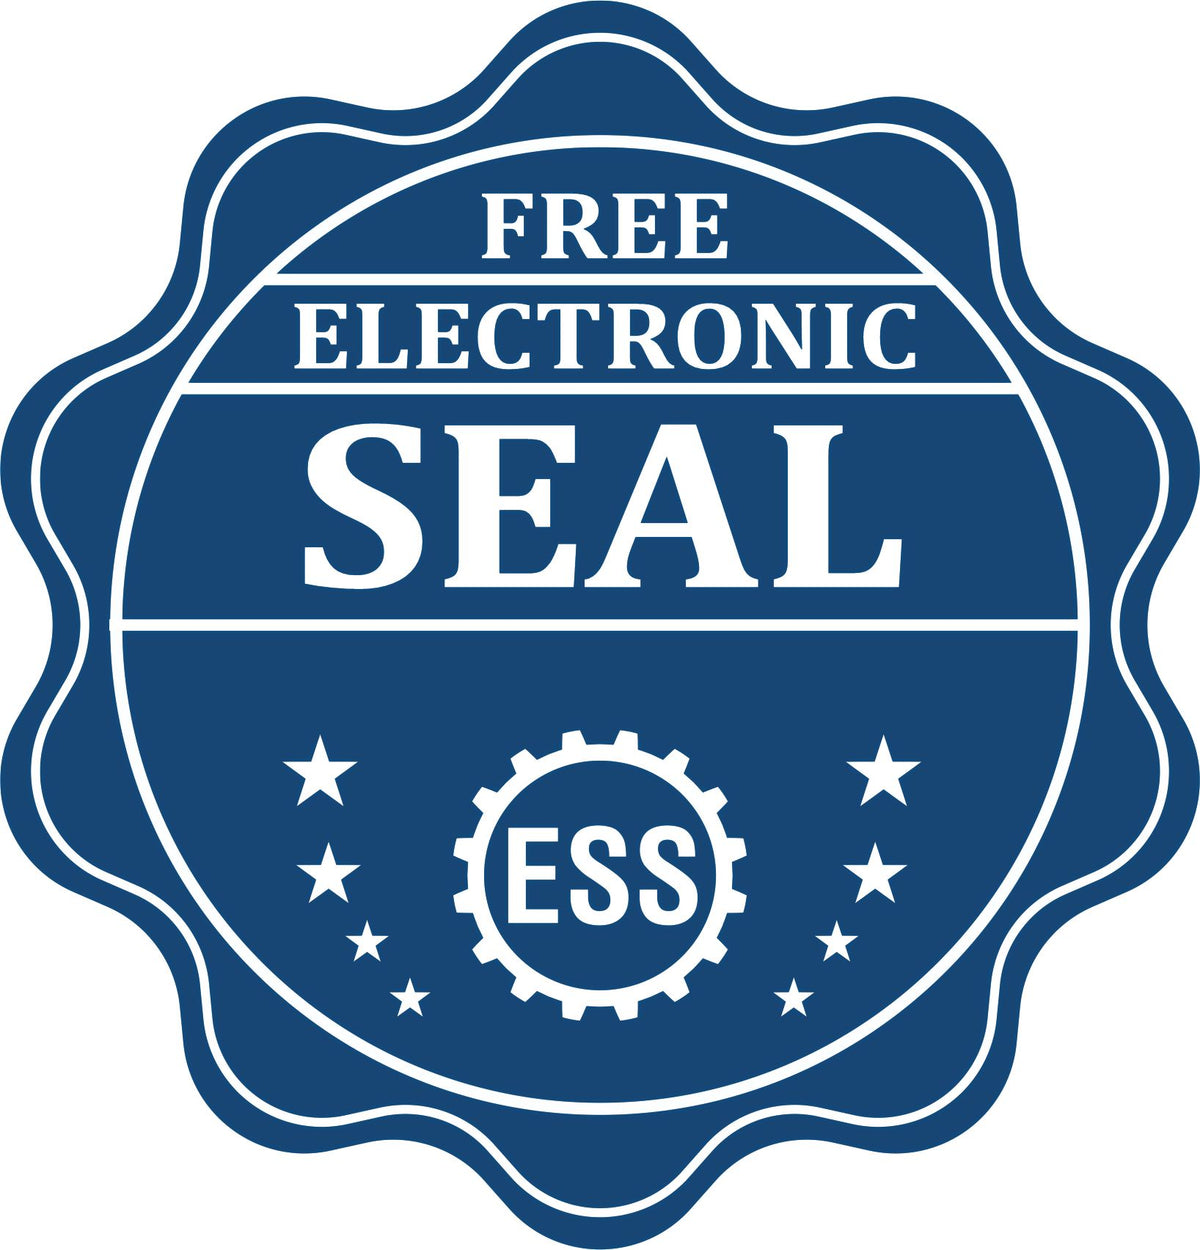 A badge showing a free electronic seal for the MaxLight Premium Pre-Inked Arizona State Seal Notarial Stamp with stars and the ESS gear on the emblem.